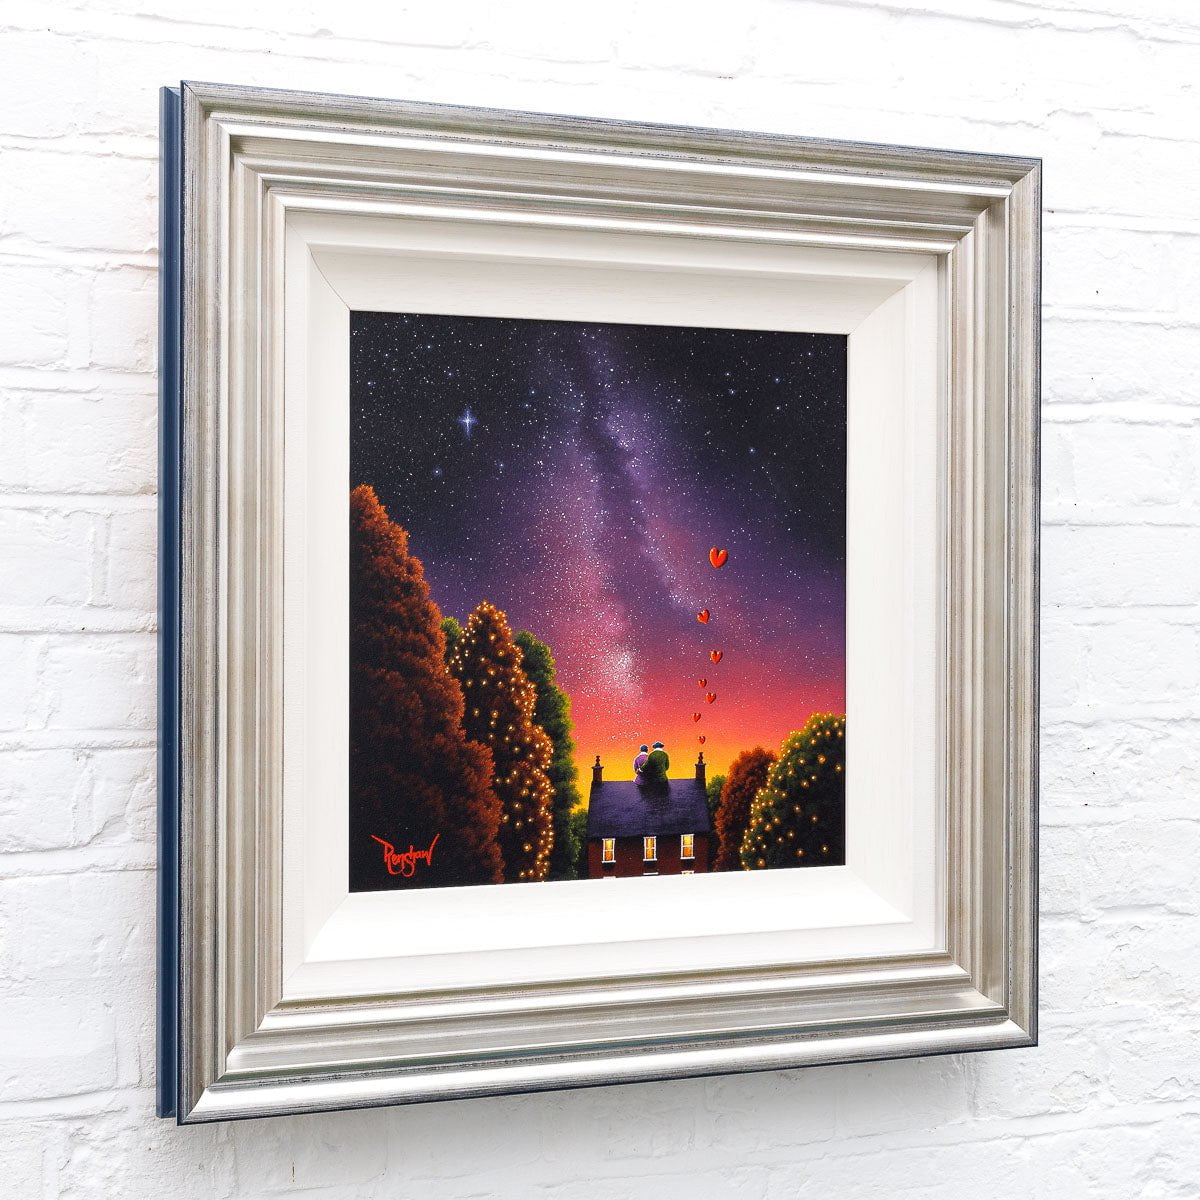 You, Me and The Stars David Renshaw Framed